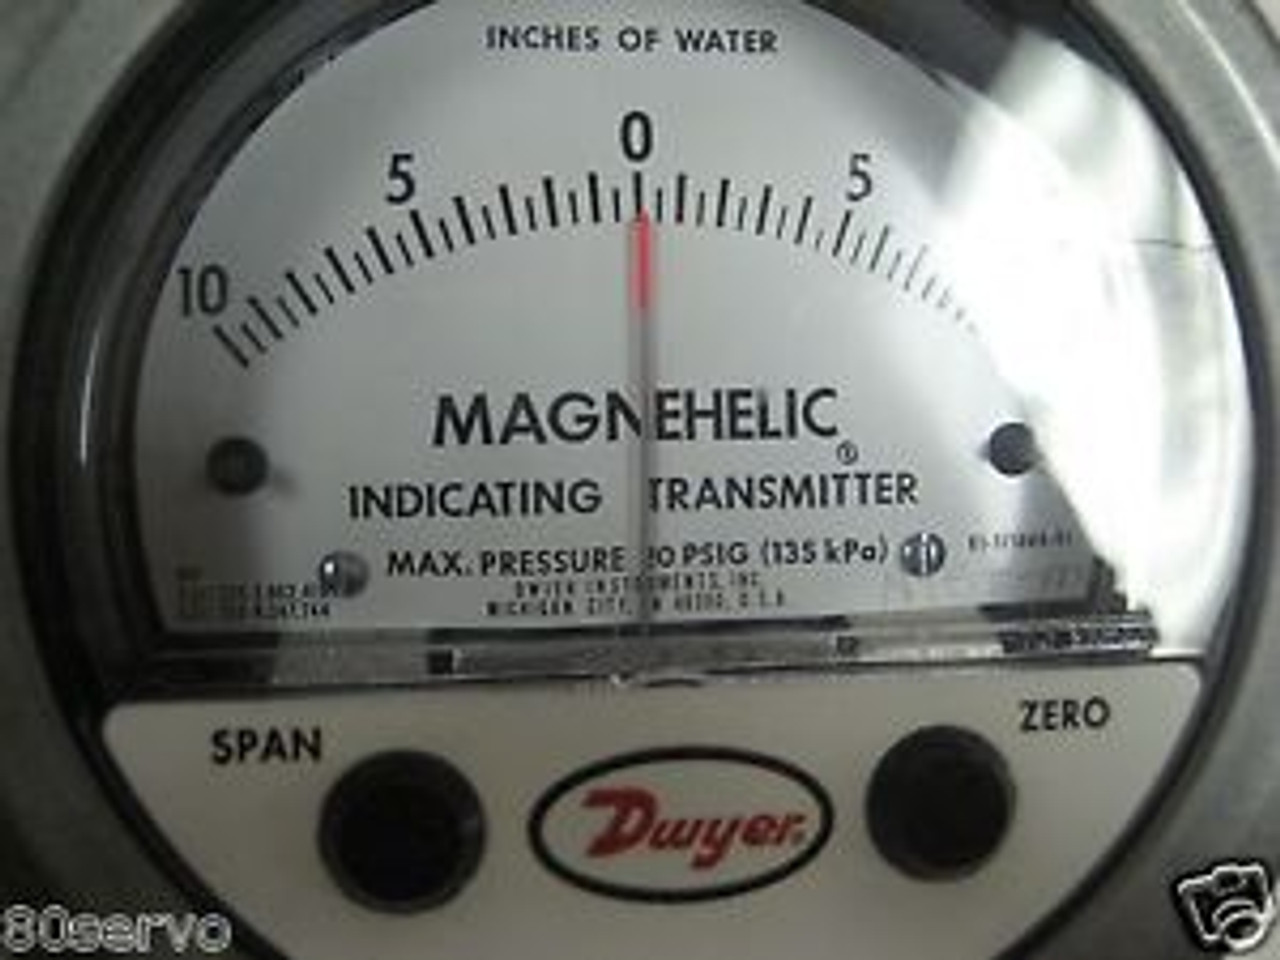 DWYER MAGNEHELIC GAGE # 171664  10-0-10 INCHES OF WATER  4" DIA 4-20MA OUTPUT 